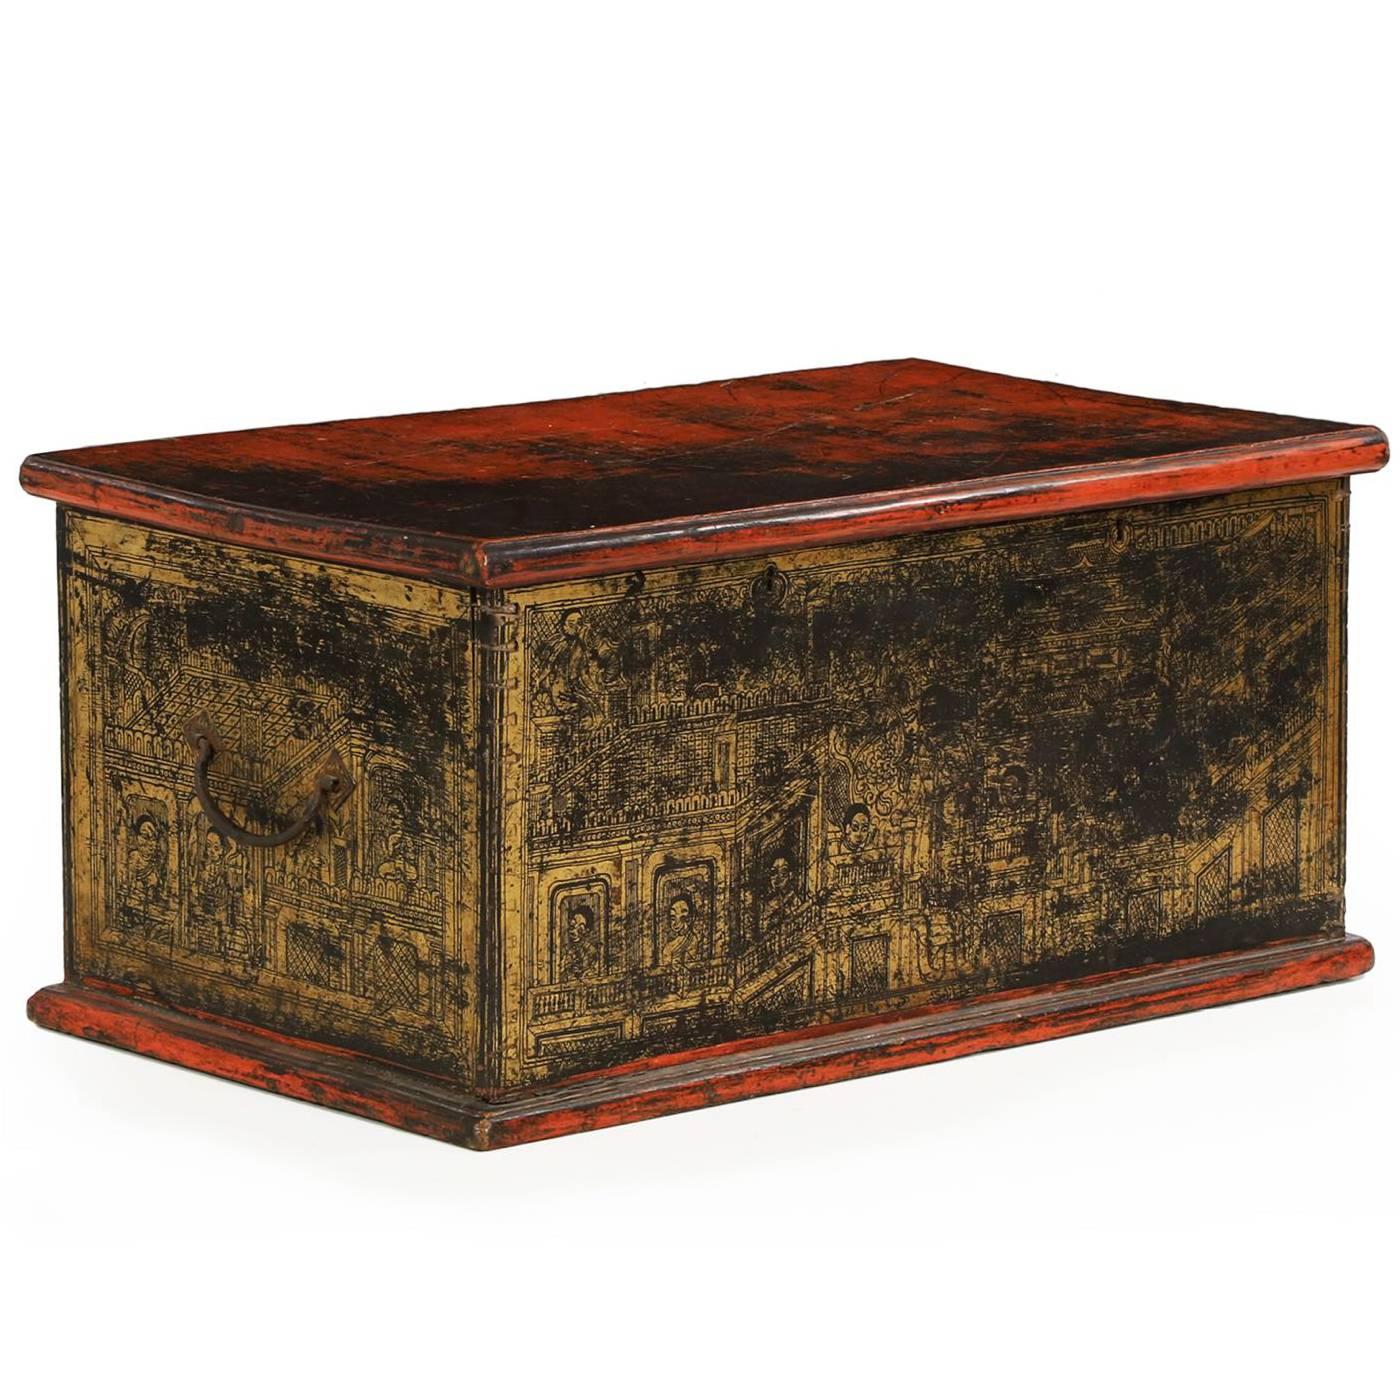 19th Century Asian Gilt Decorated and Red Polychromed Antique Blanket Chest